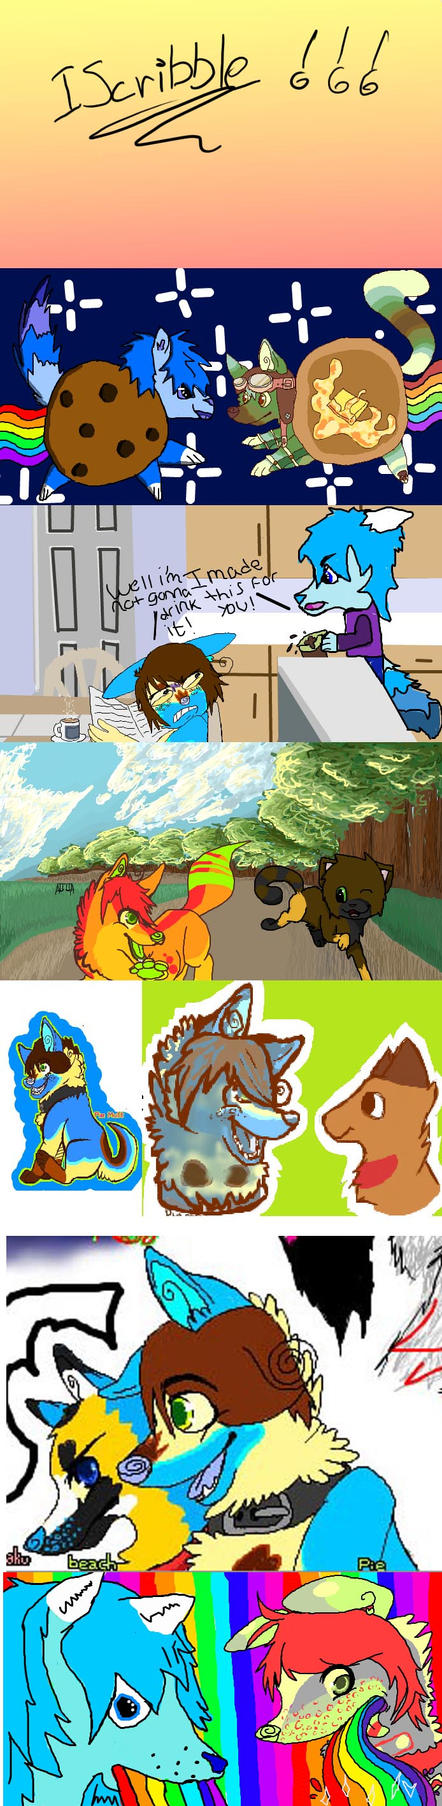 icribble_madness_by_piemutt-d3kugz4.jpg